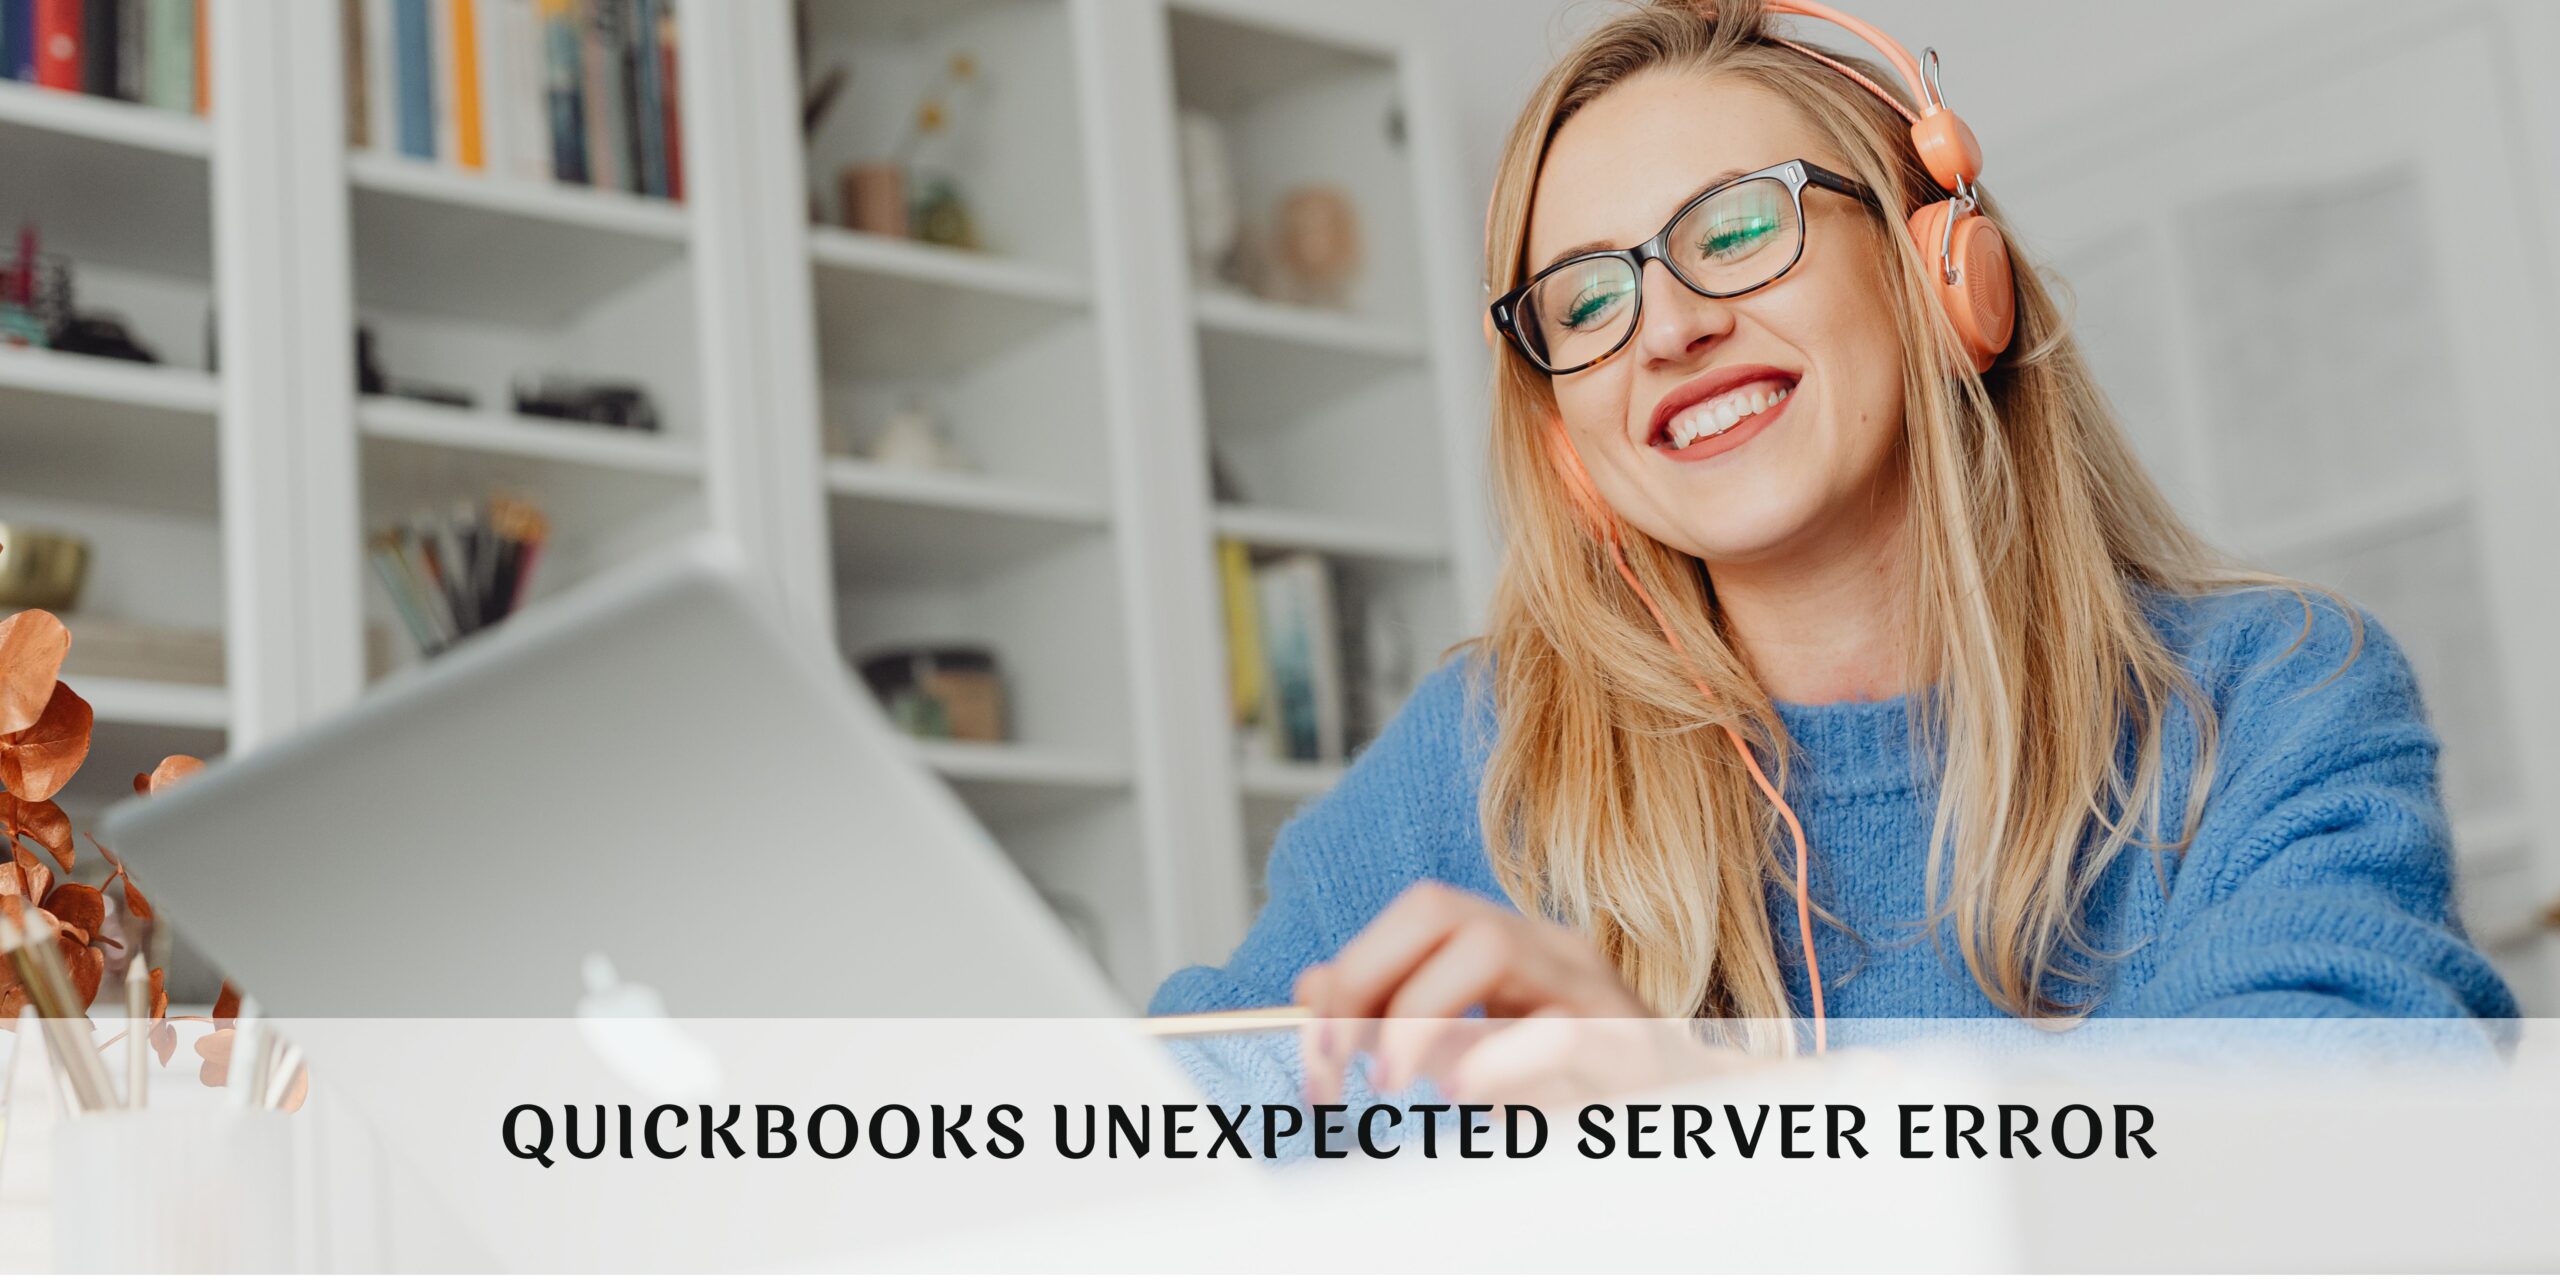 This Girl is Trying to Resolve QuickBooks Unexpected Server Error